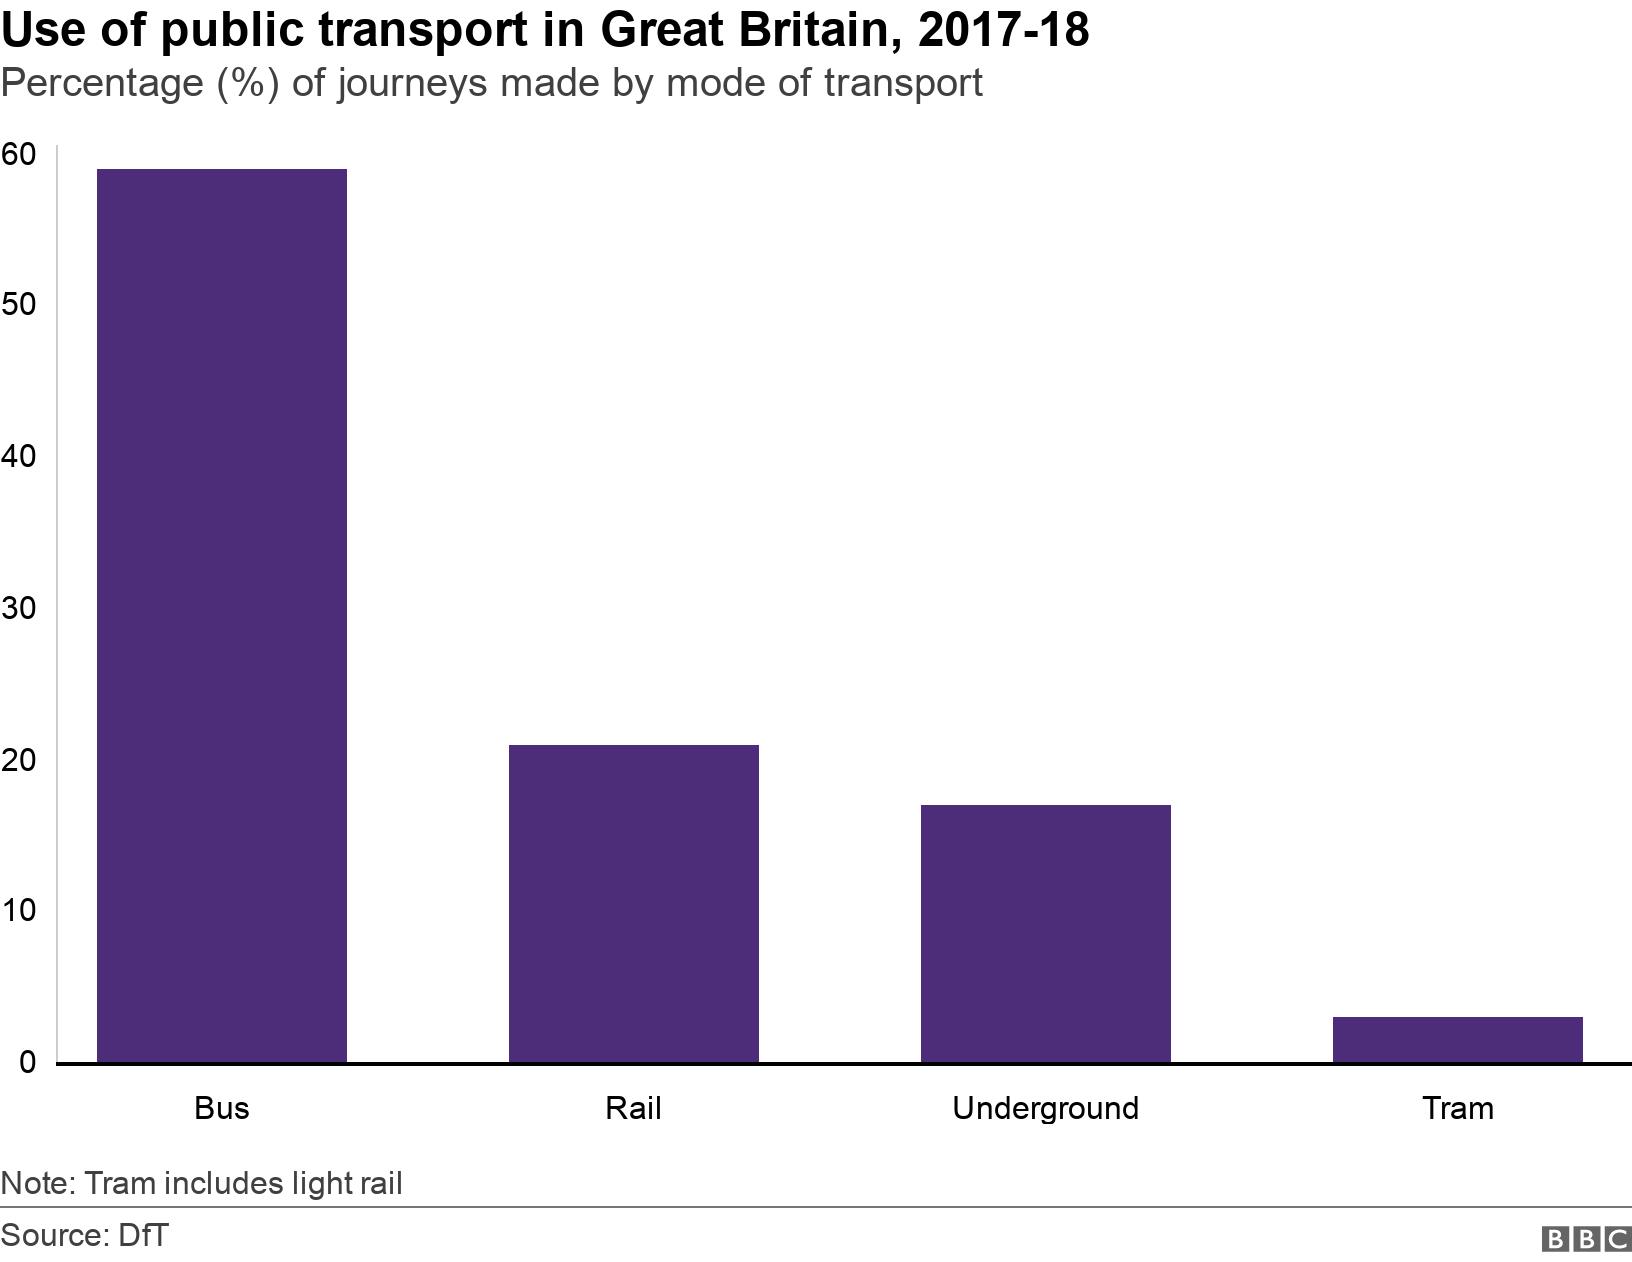 Use of public transport in Great Britain, 2017-18. Percentage (%) of journeys made by mode of transport. Note: Tram includes light rail.